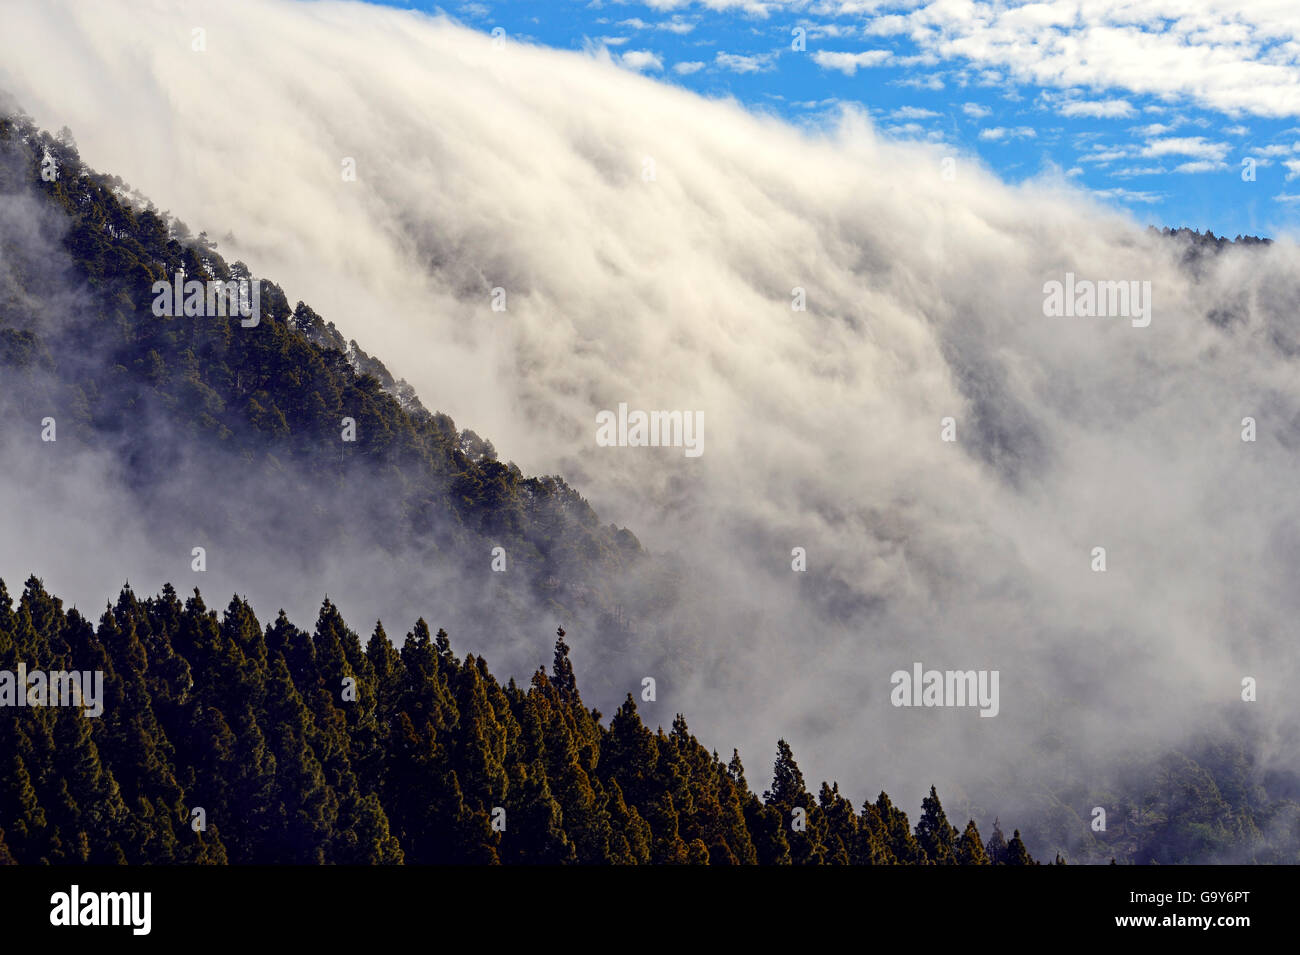 Trade wind clouds haning over a crest, Teide National Park, Tenerife, Canary Islands, Spain Stock Photo